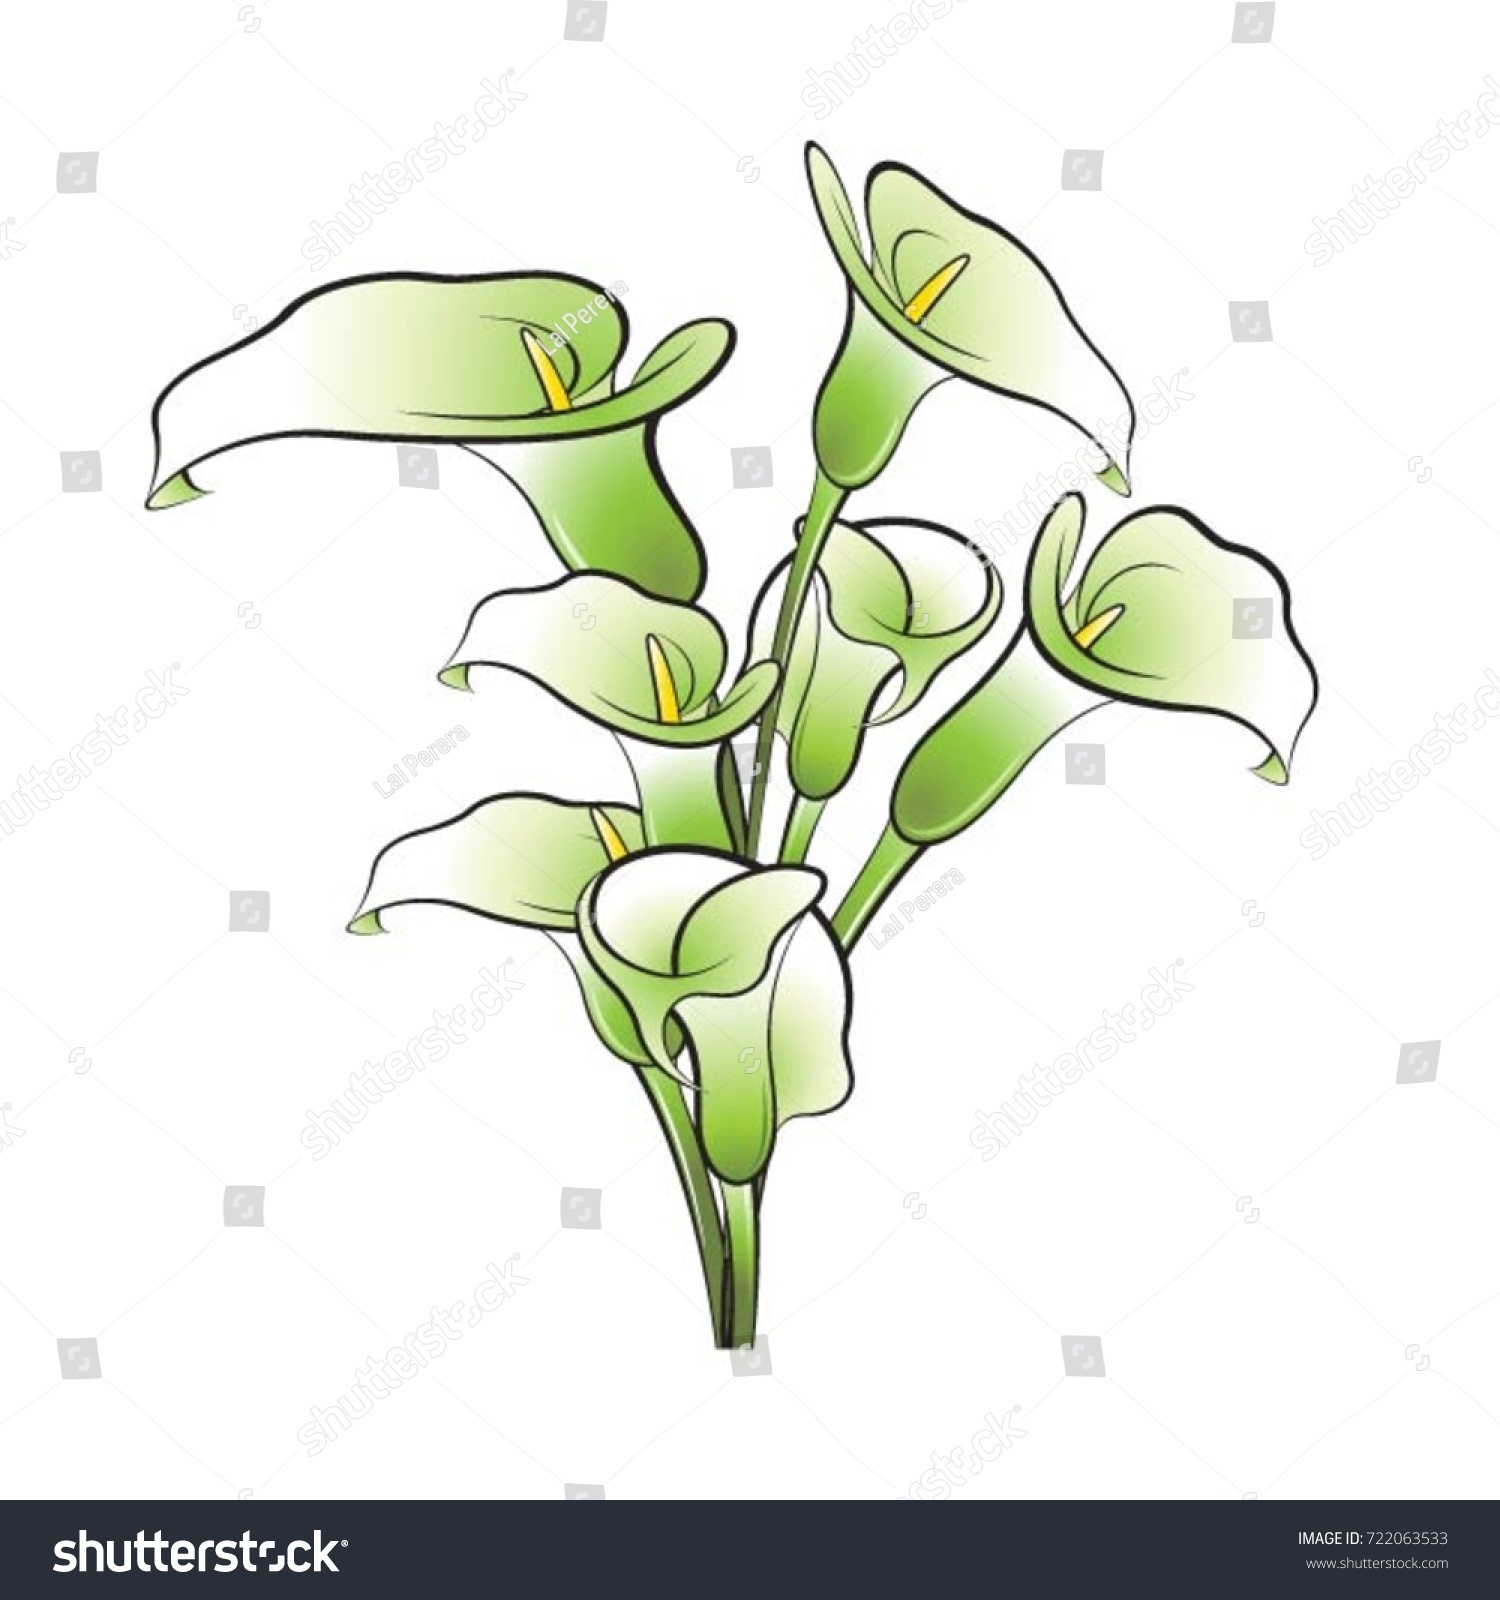 Green Black Calla Lily Flowervector Drawing Stock Vector (Royalty Free ...